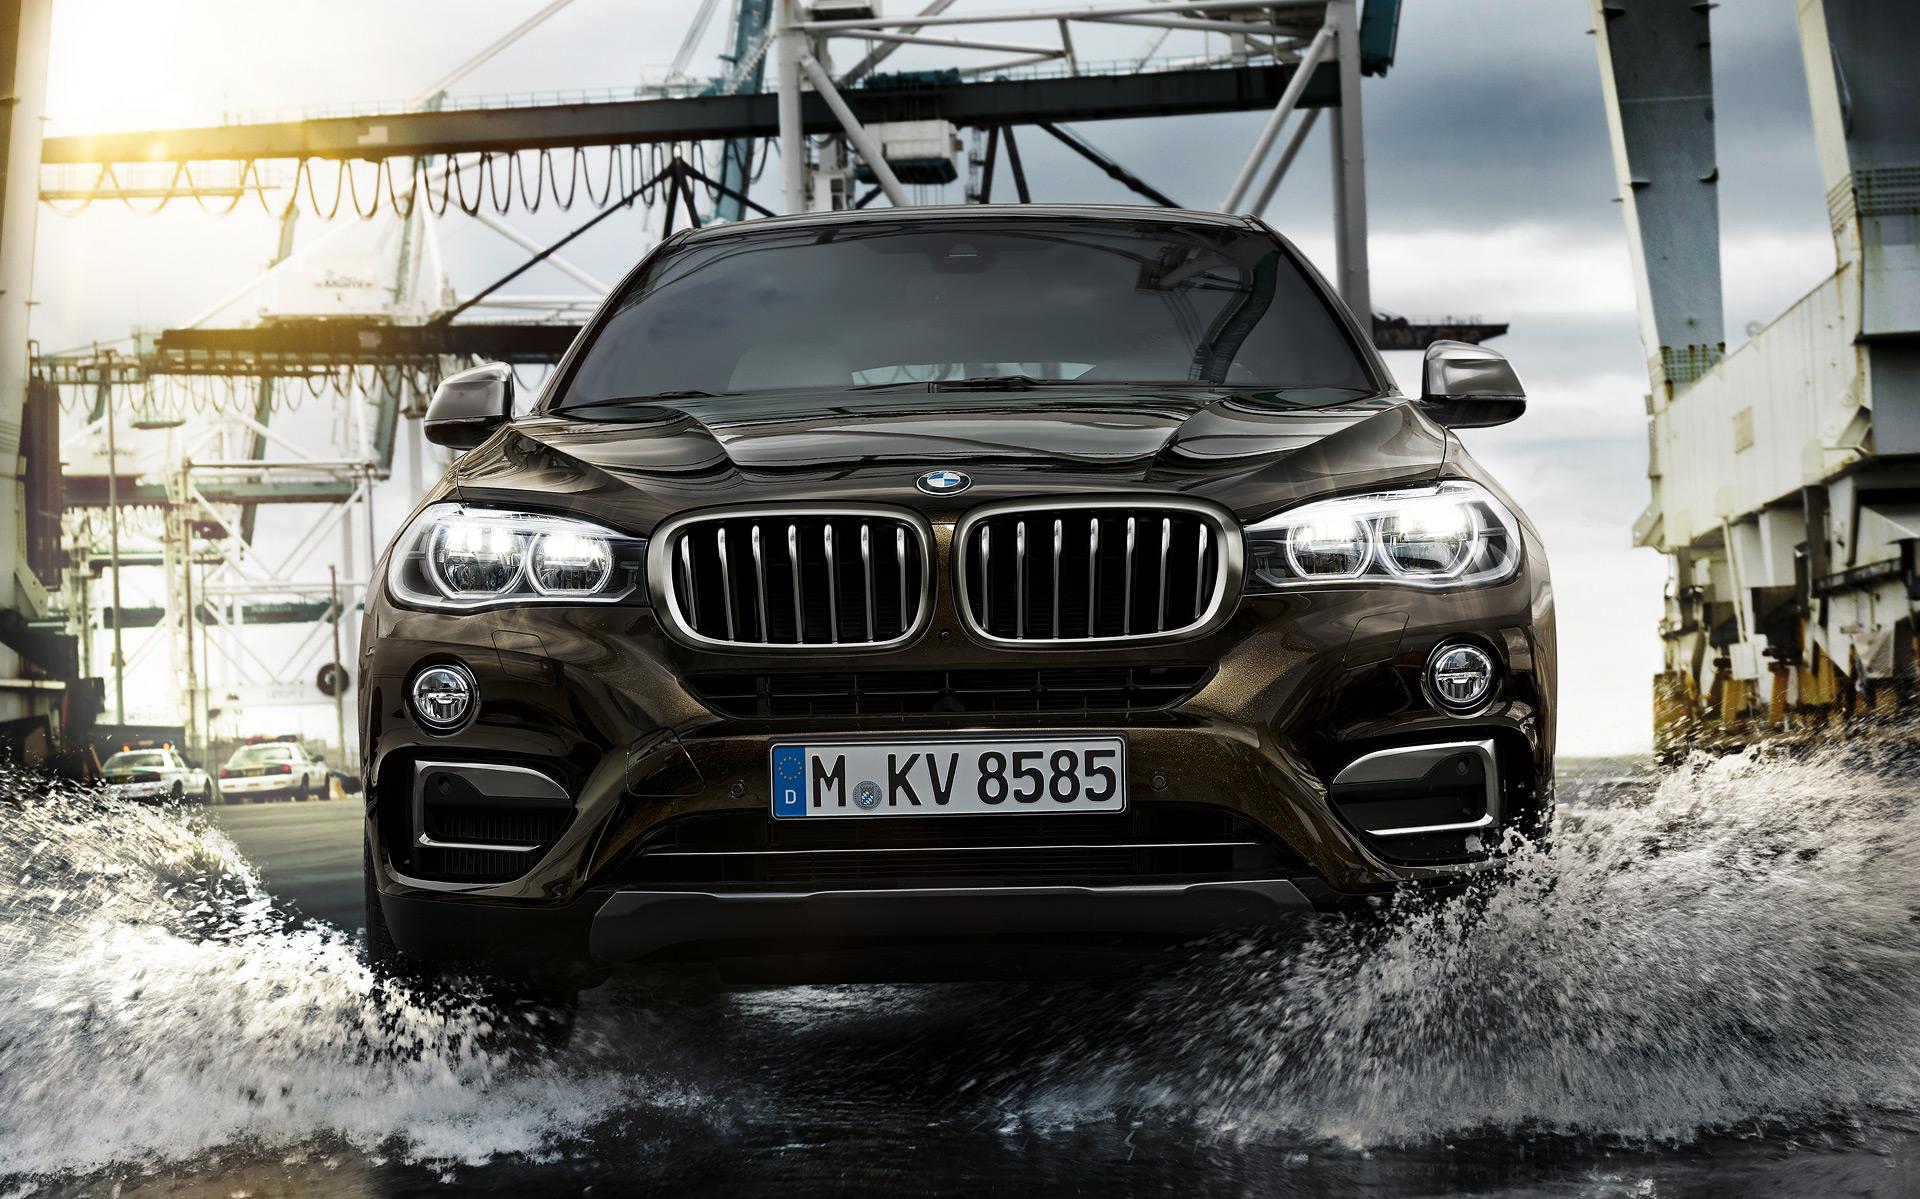  BMW X6 DOWNLOAD WALLPAPERS